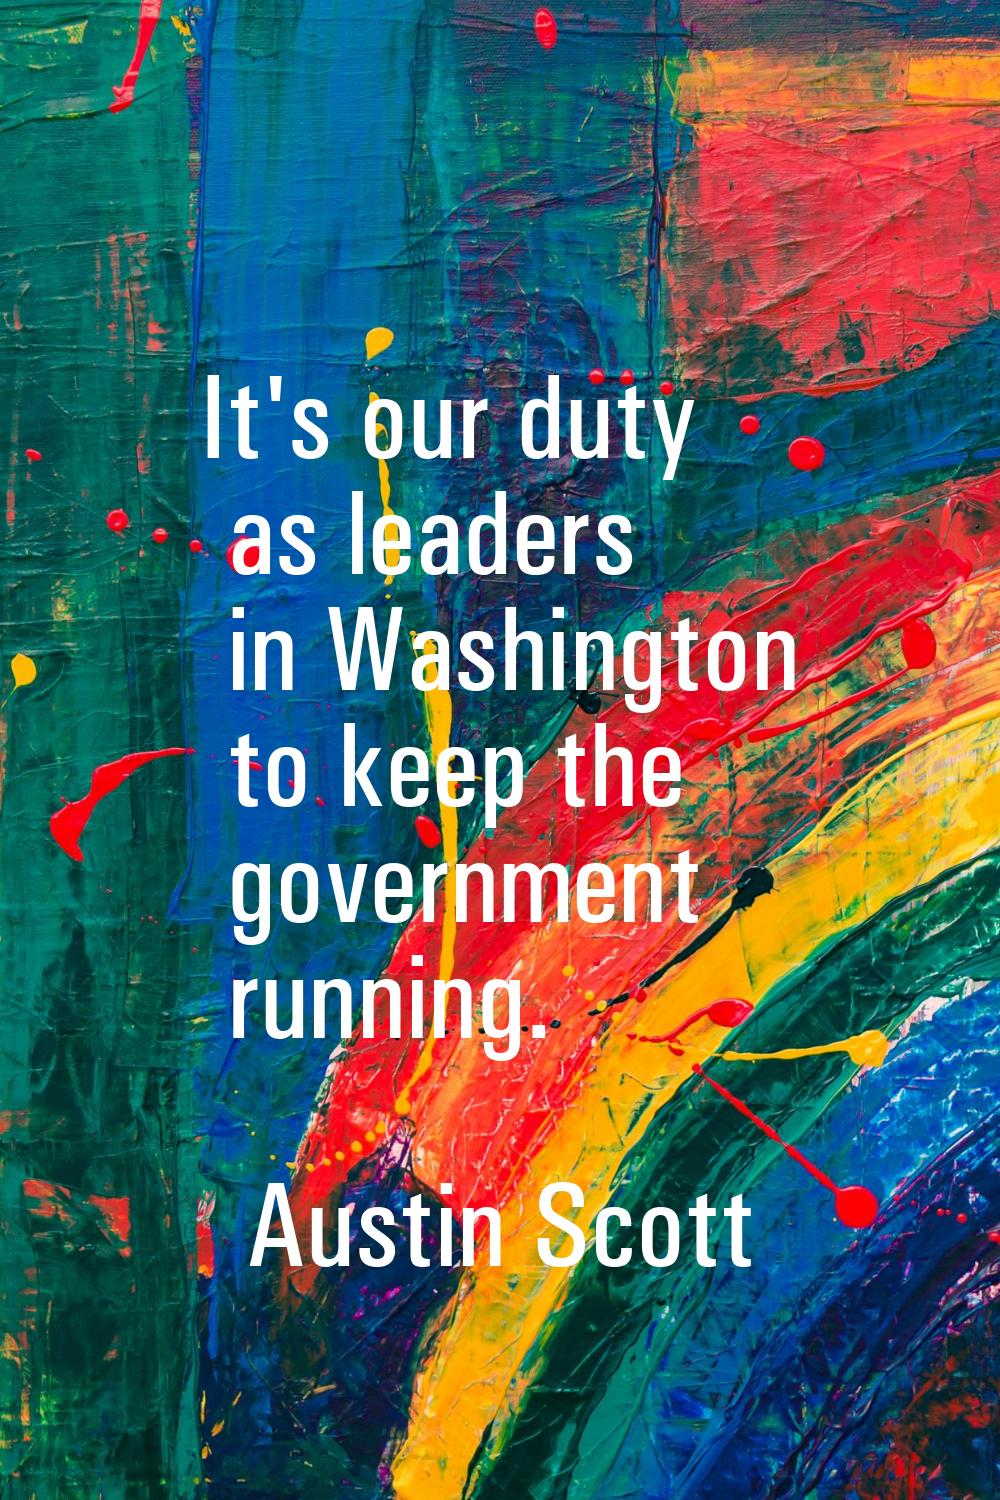 It's our duty as leaders in Washington to keep the government running.